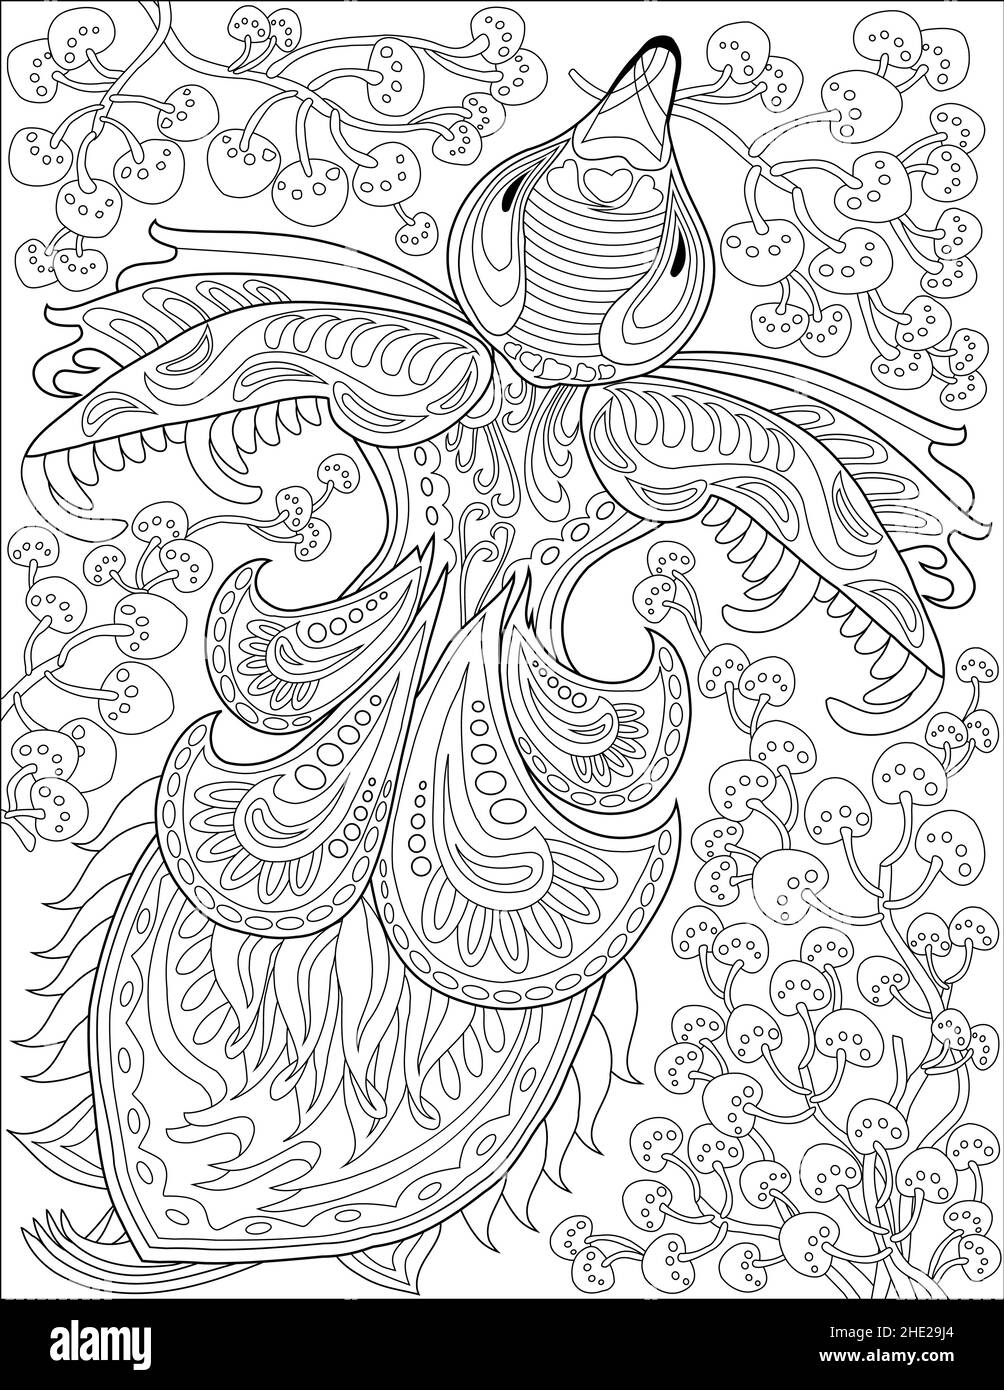 Moon Printable Adult Coloring Page From Favoreads coloring -   Shape  coloring pages, Star coloring pages, Printable adult coloring pages